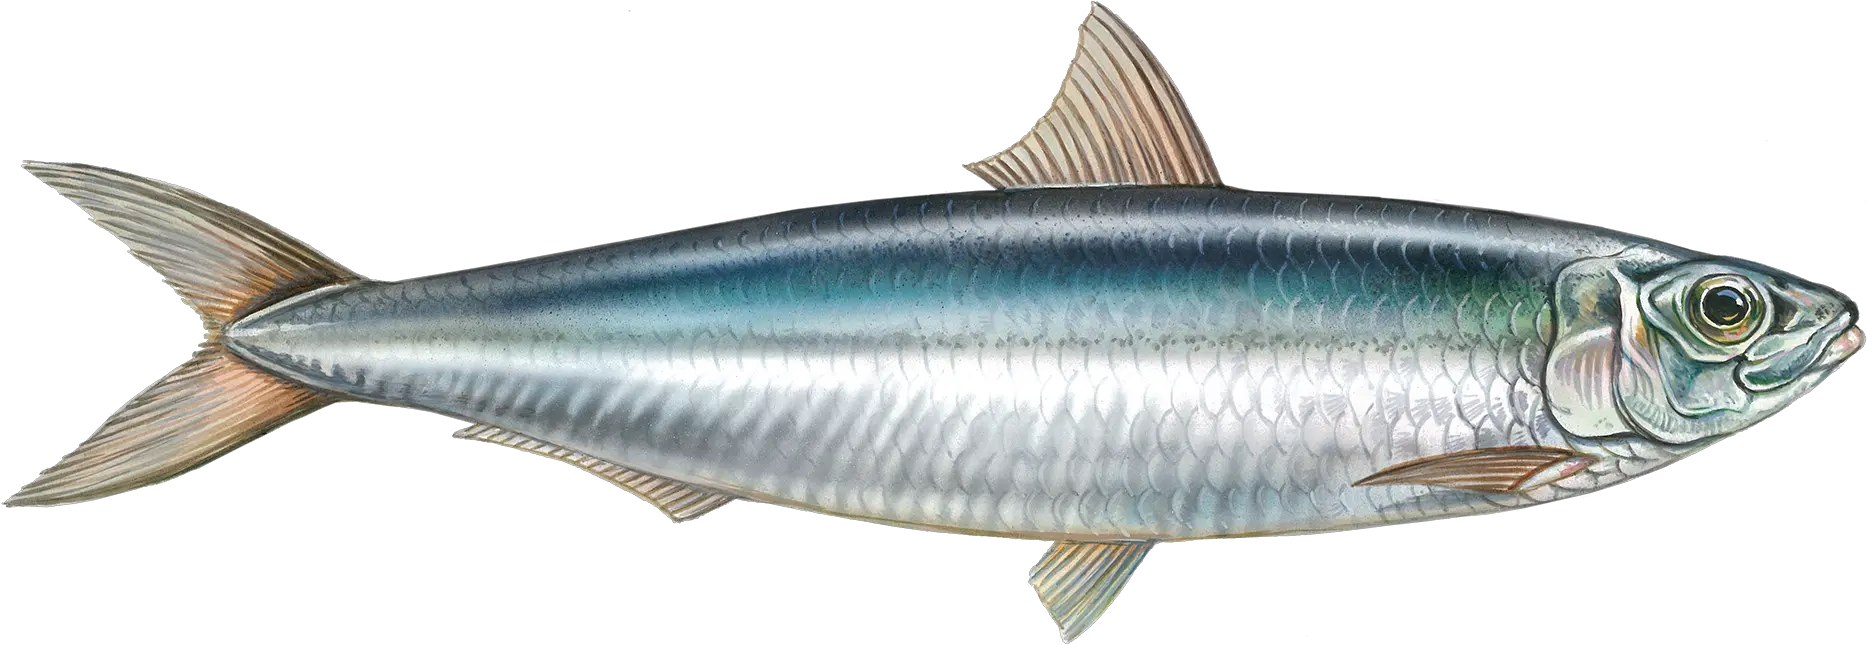 About Our Frozen Fish Products Supplier For Africa Asia Transparent Sardine Fish Png Bass Fish Png